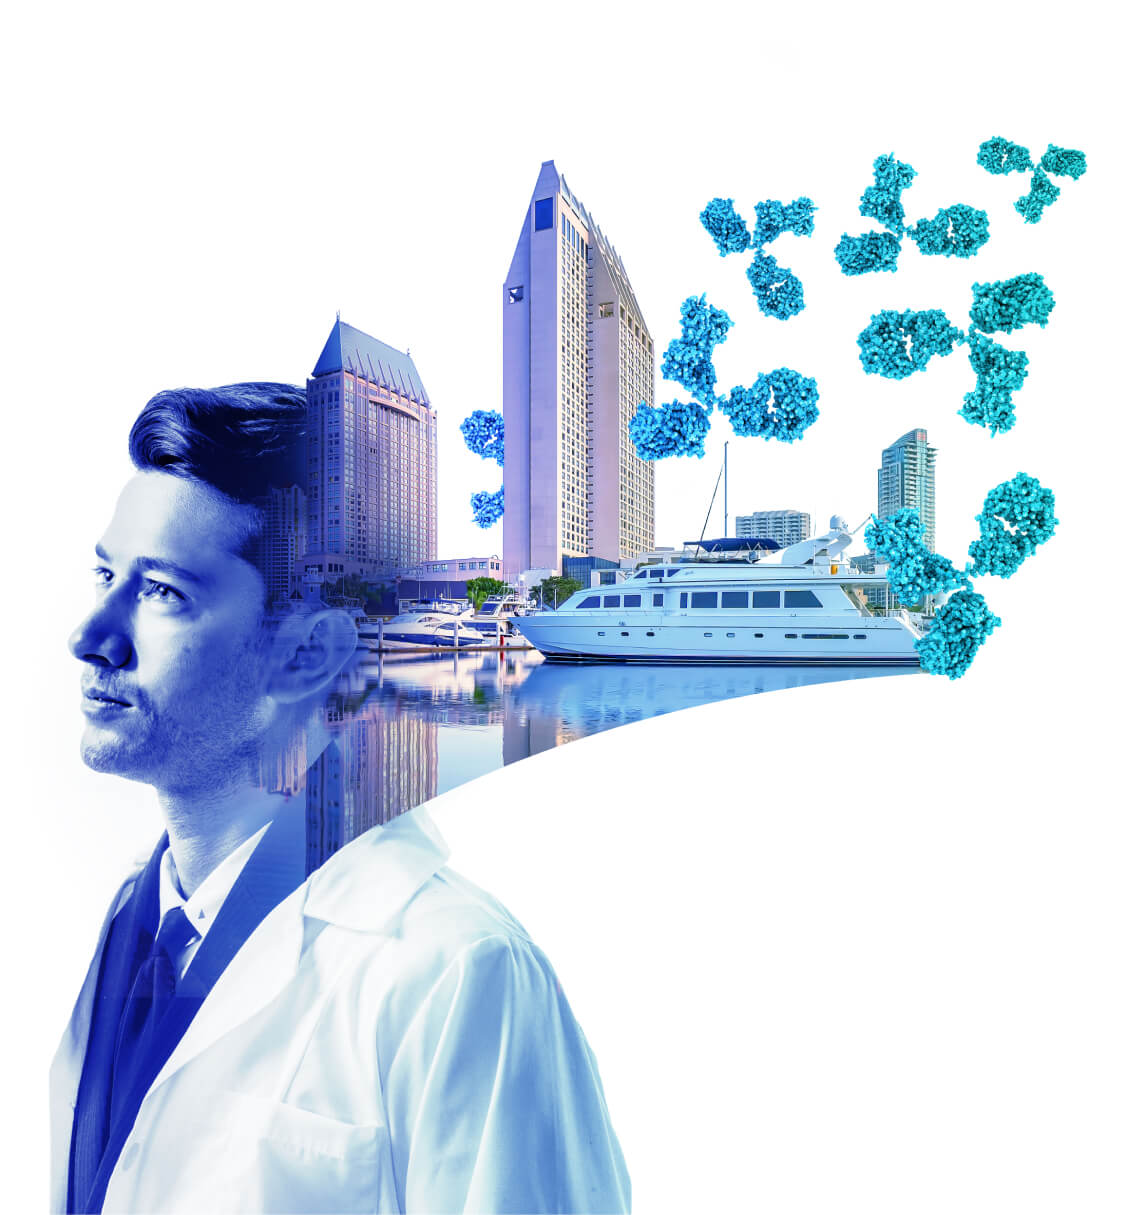 Graphic artwork of a person in a lab coat combined with an image of the local harbor area and cells